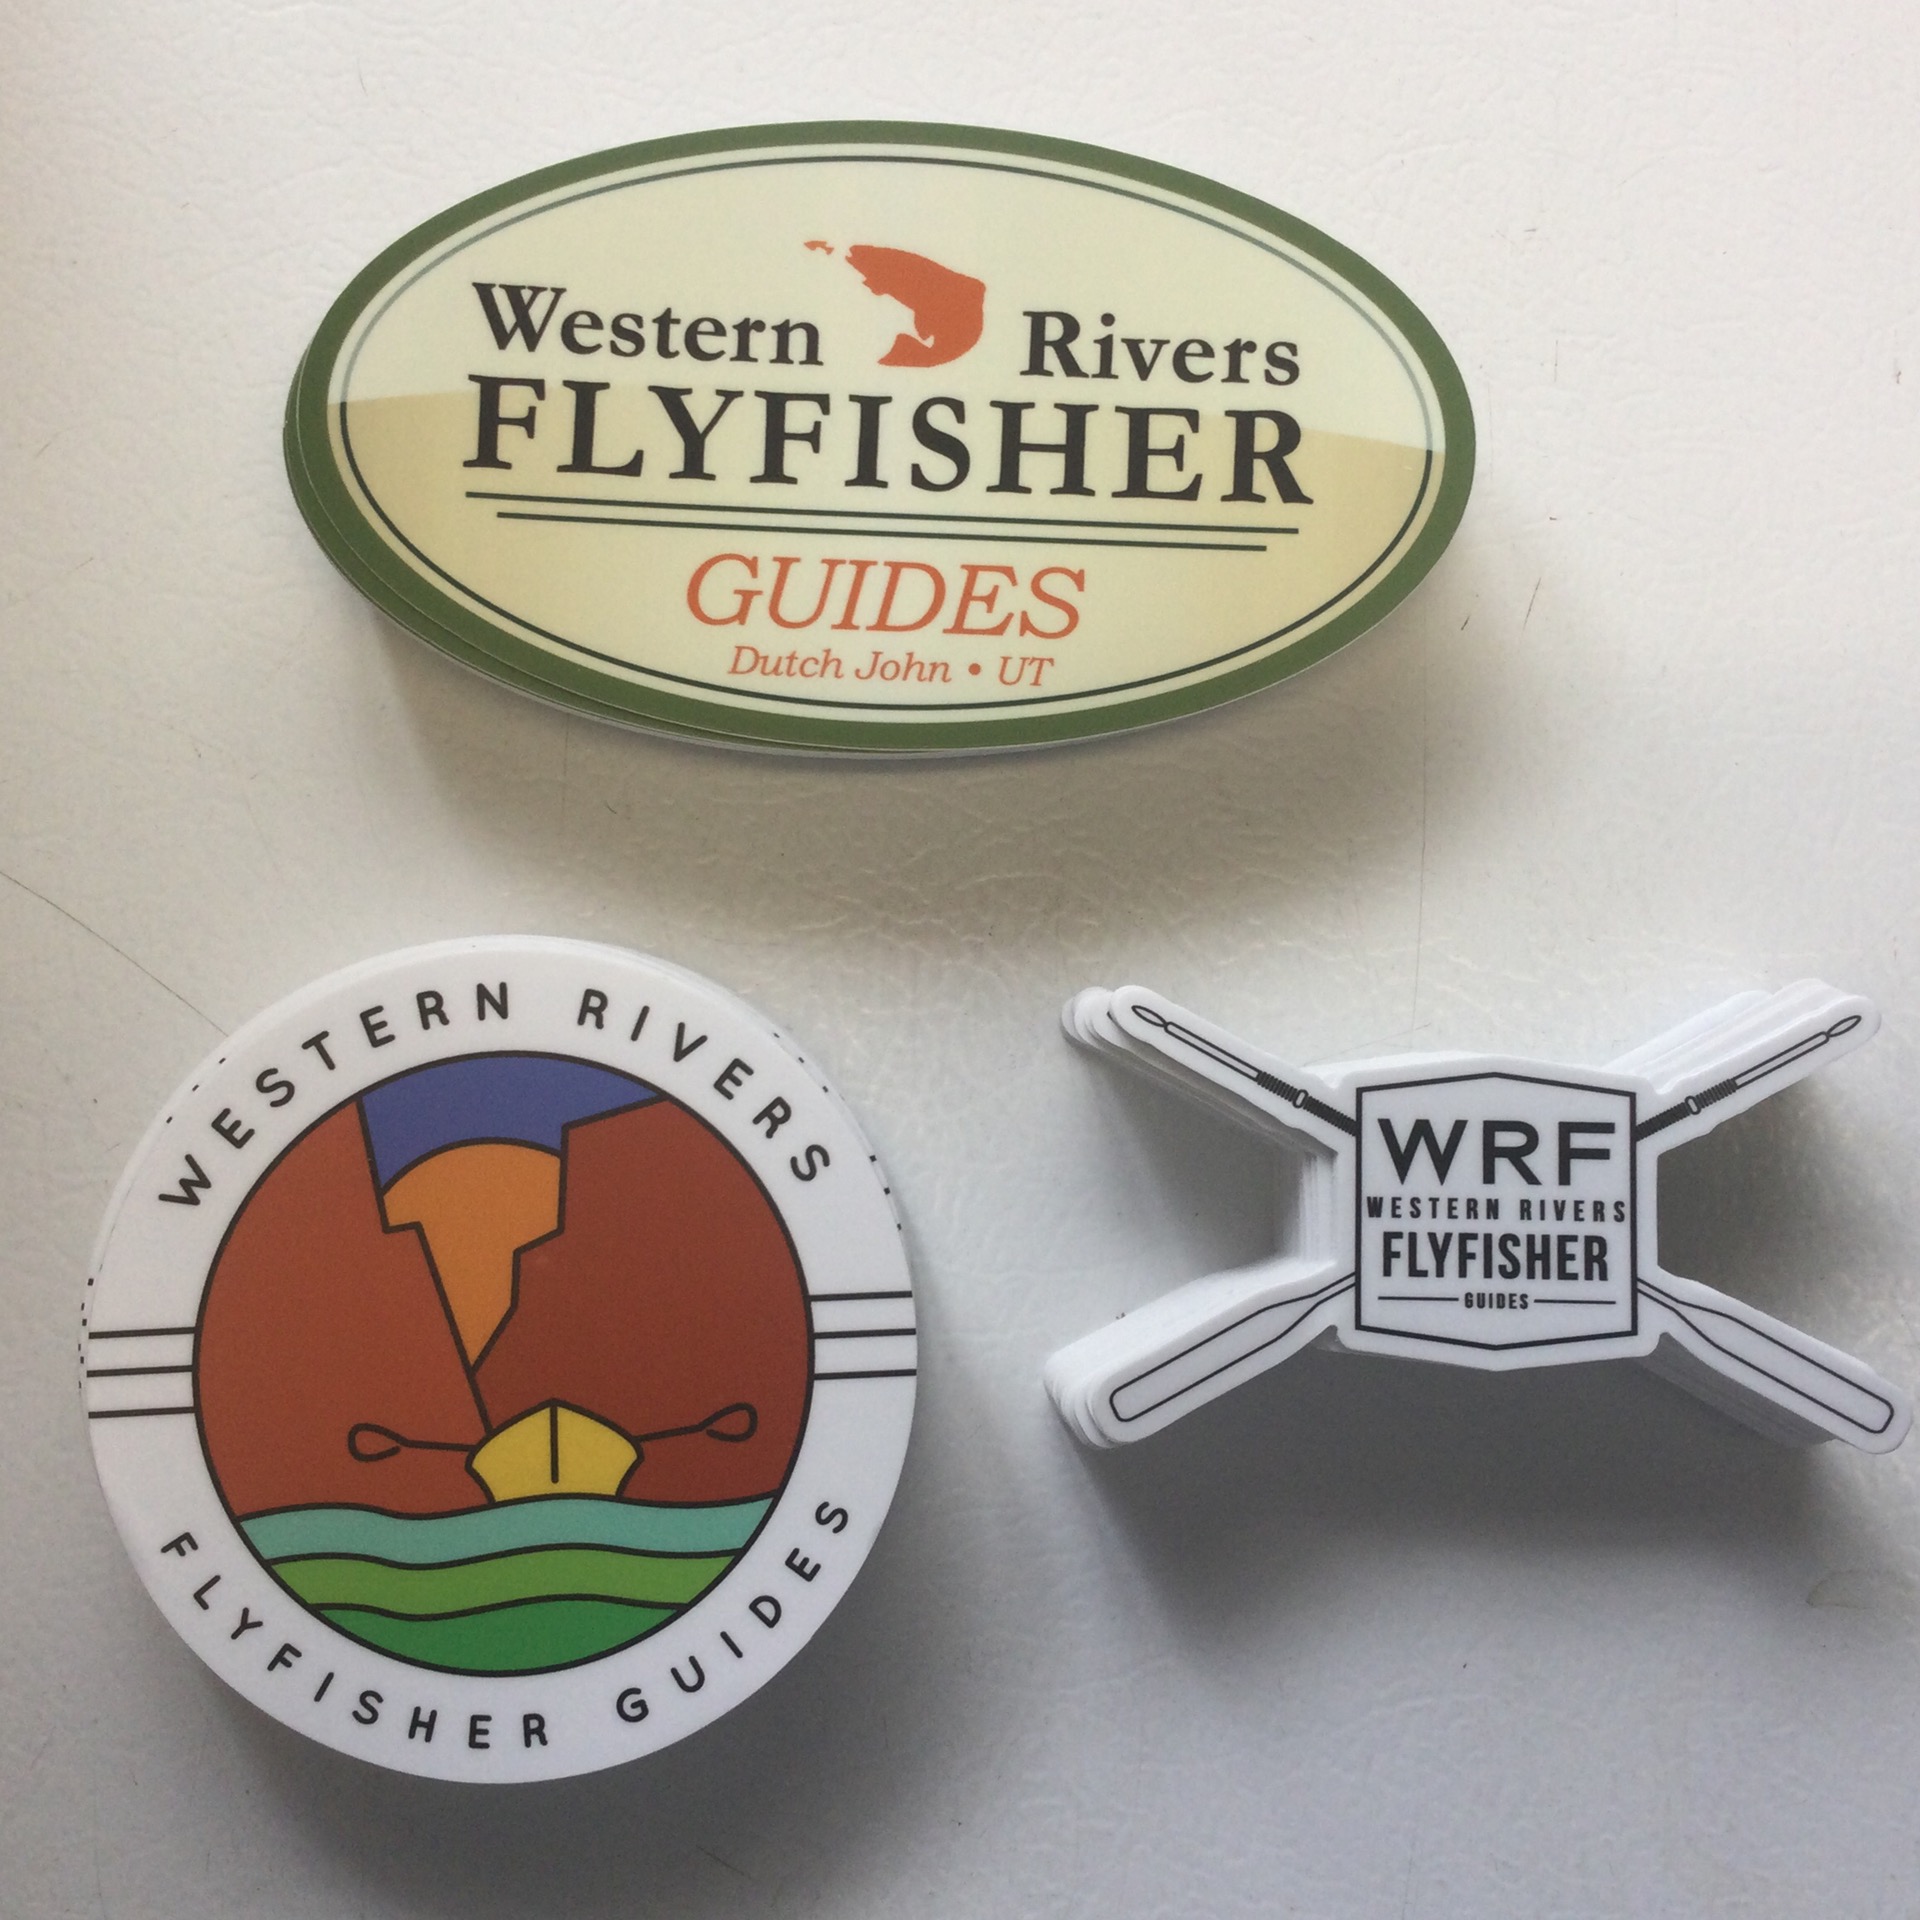 WRFG Large Stickers - WRFguides